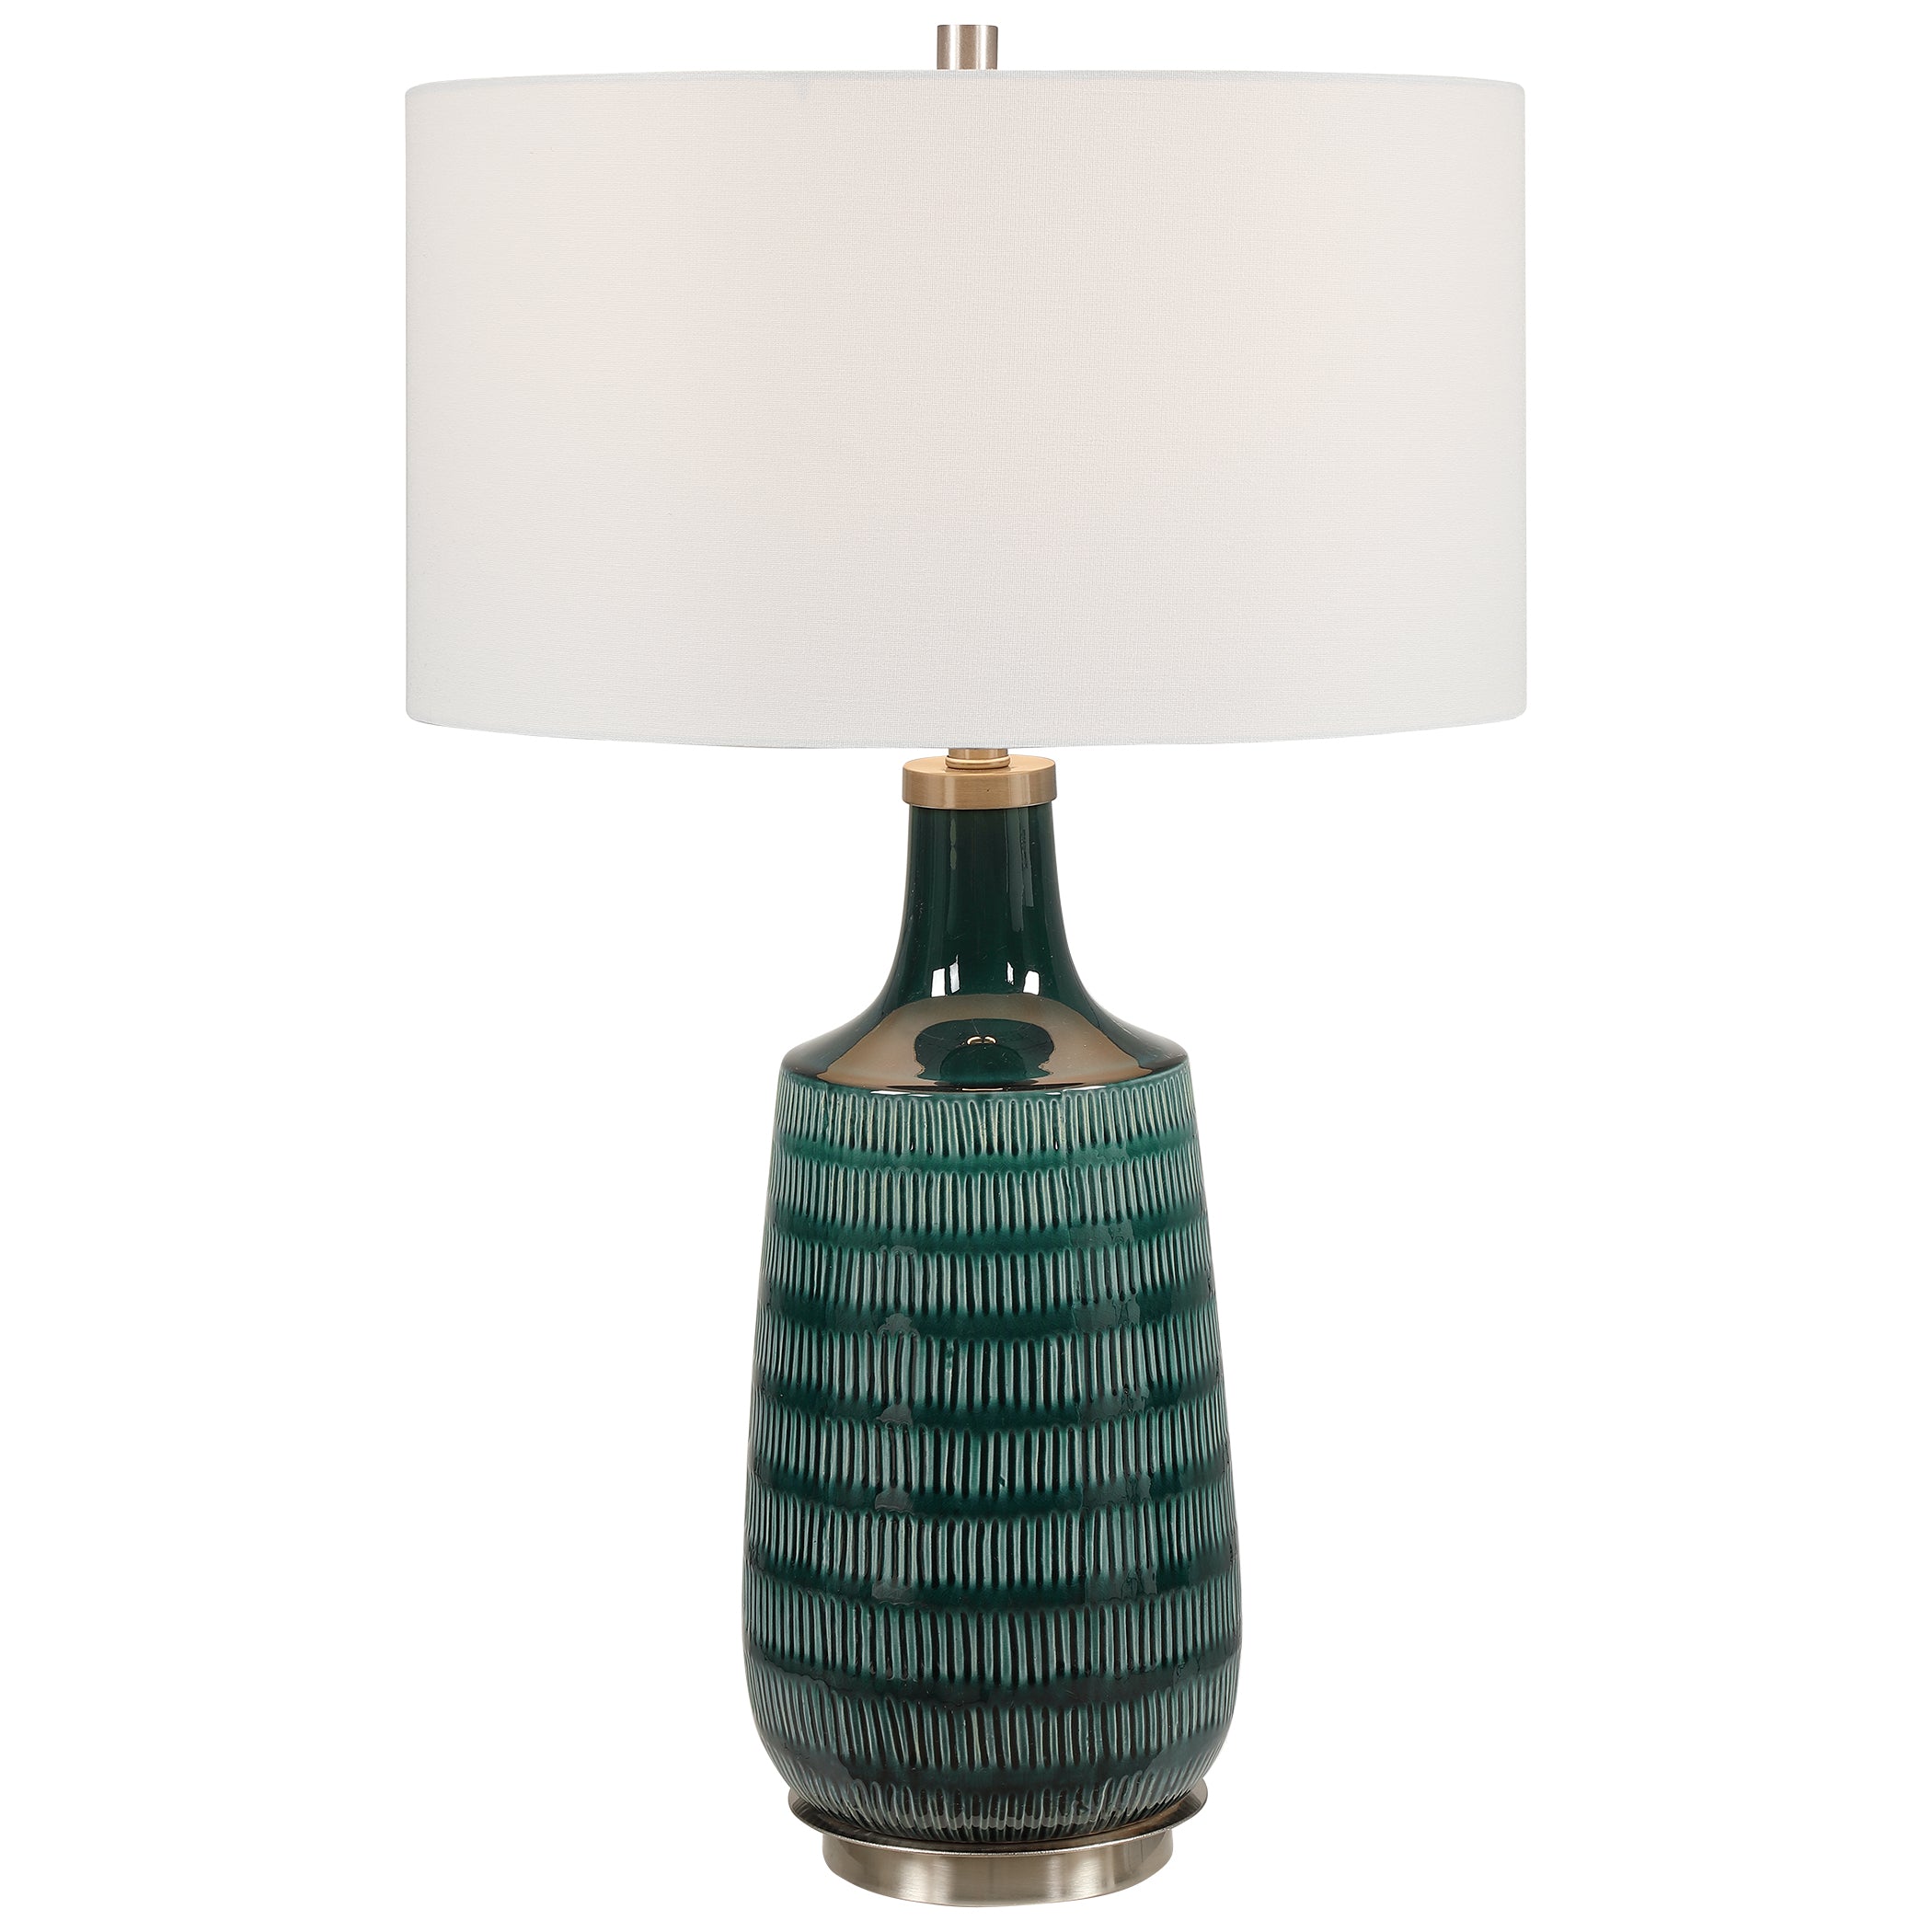 Uttermost Scouts Deep Green Table Lamp Deep Green Table Lamp Uttermost   